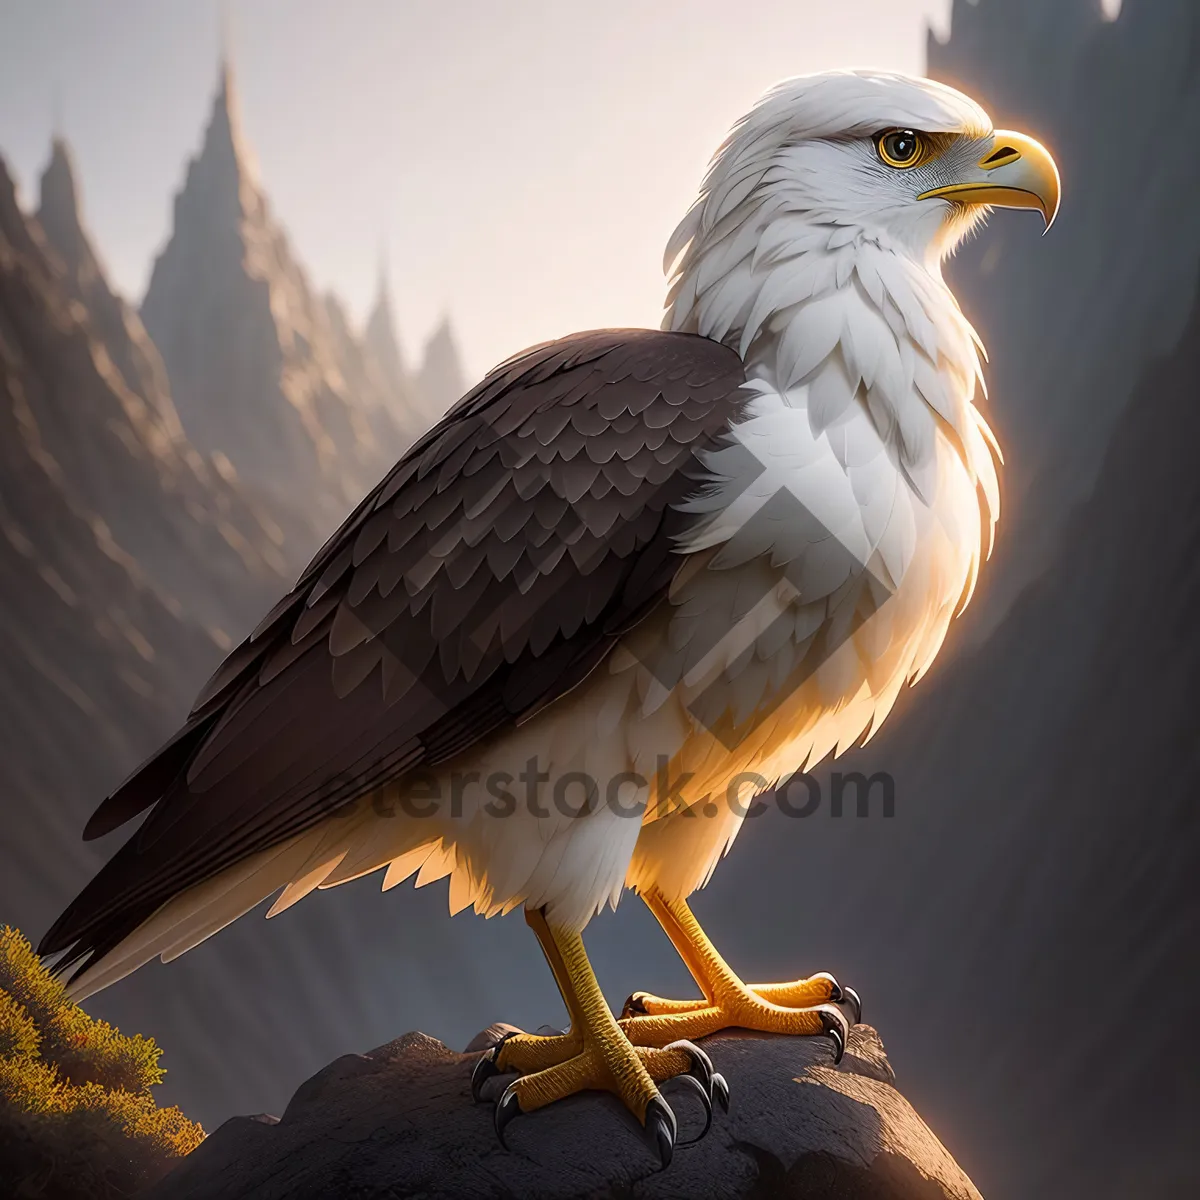 Picture of Majestic Bald Eagle Soaring with Piercing Eyes